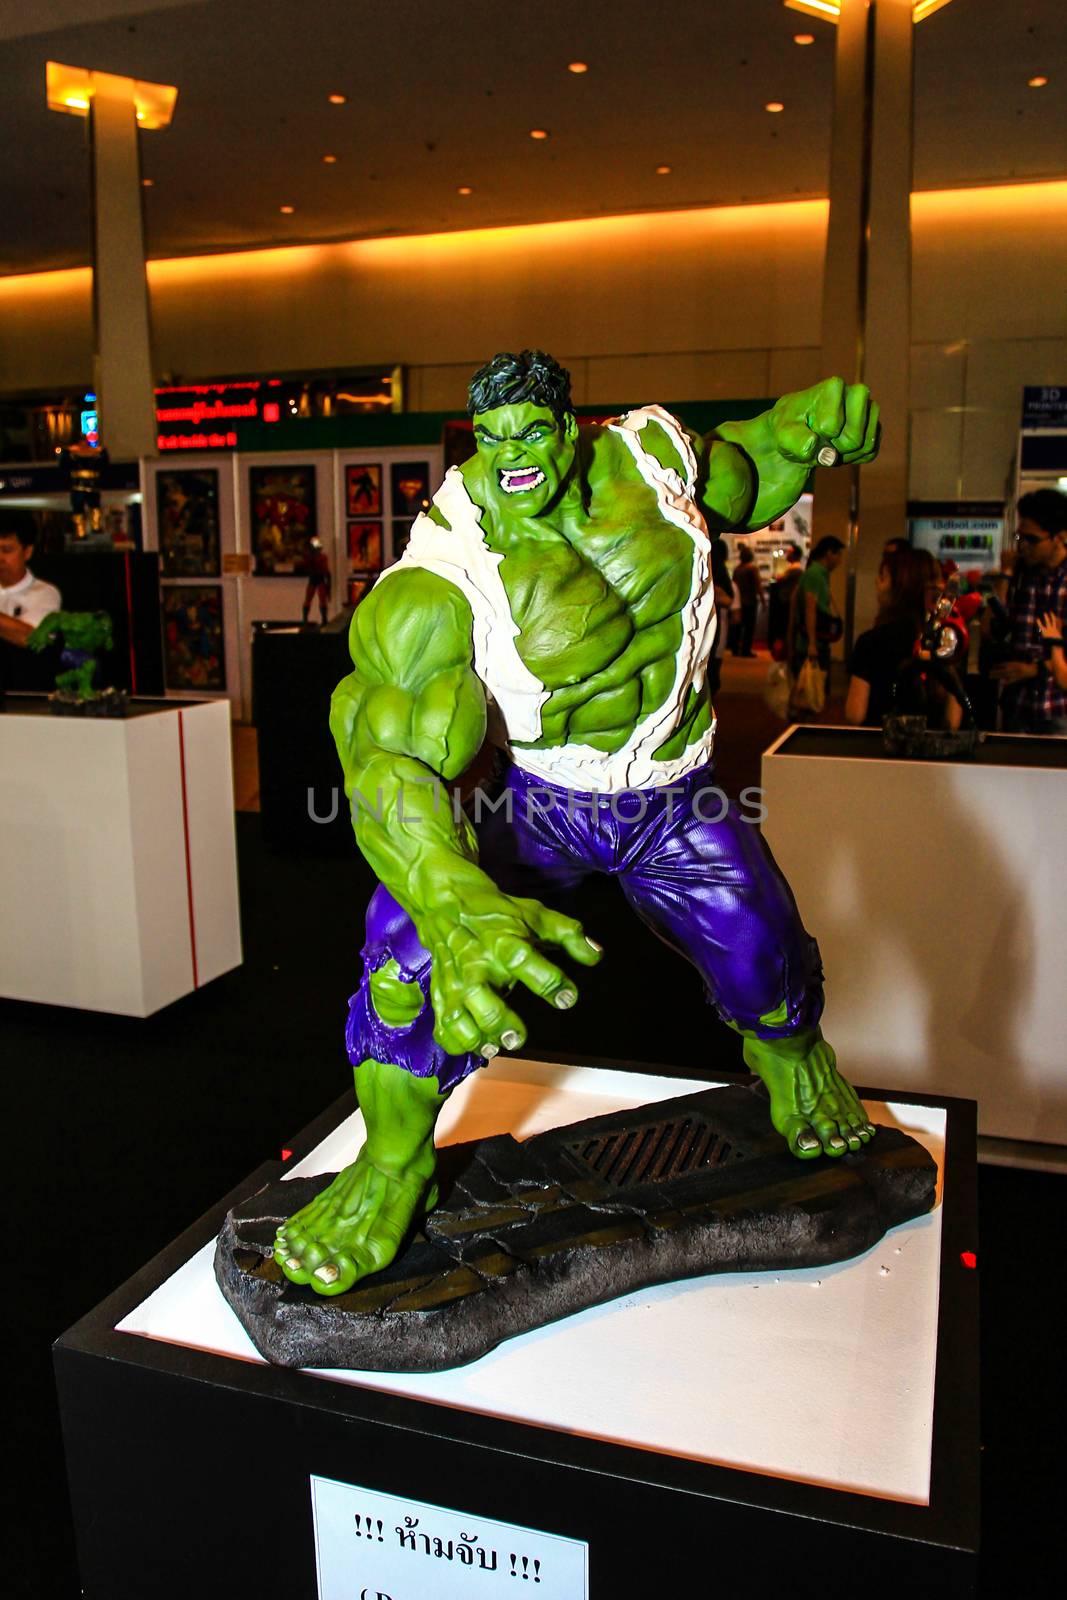 A model of the character Hulk from the movies and comics by redthirteen